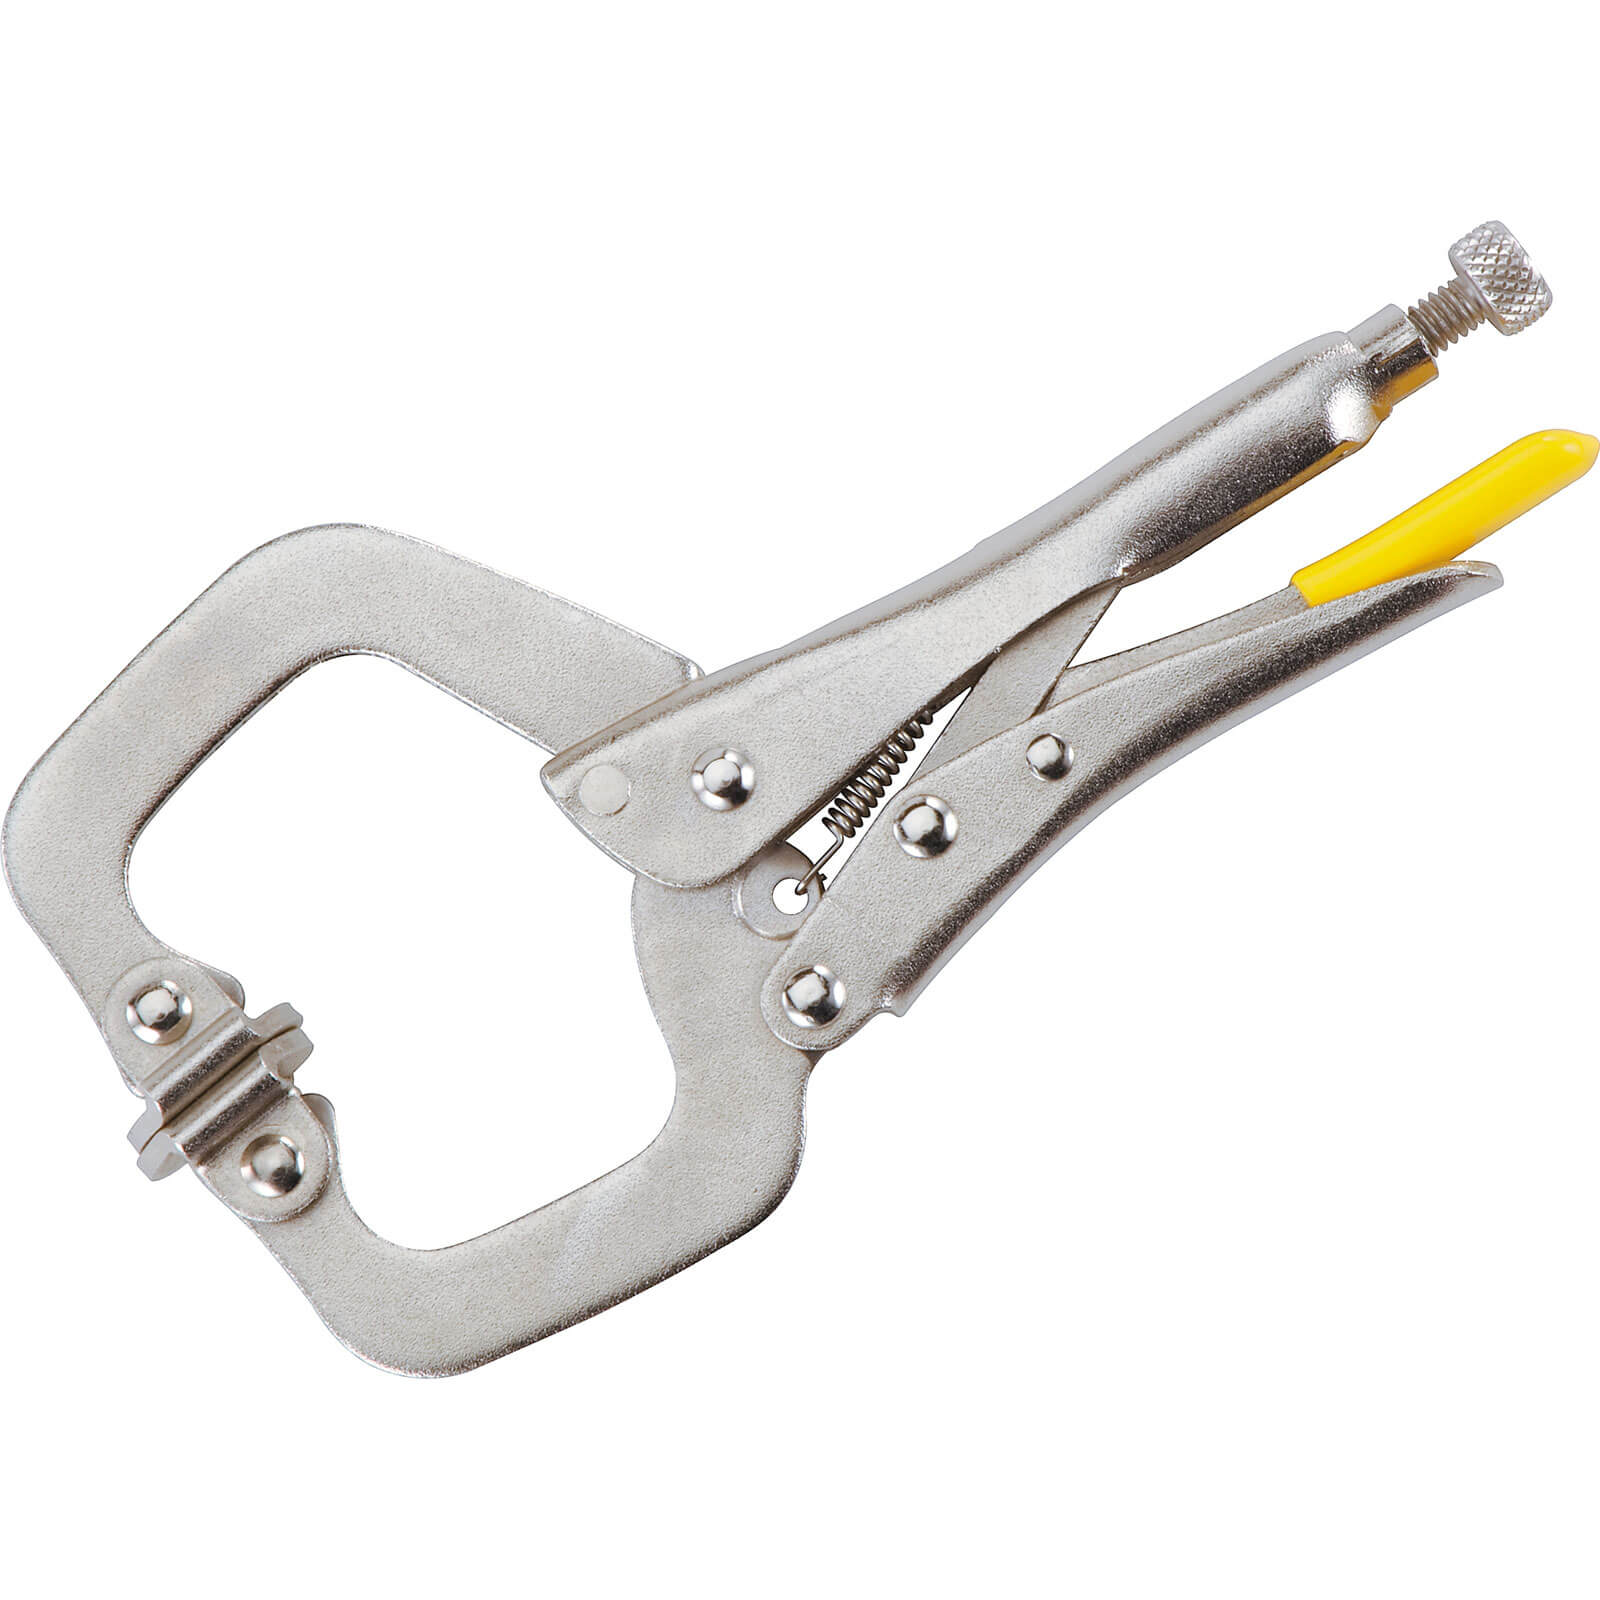 Image of Stanley Locking C Clamp Pliers 137mm